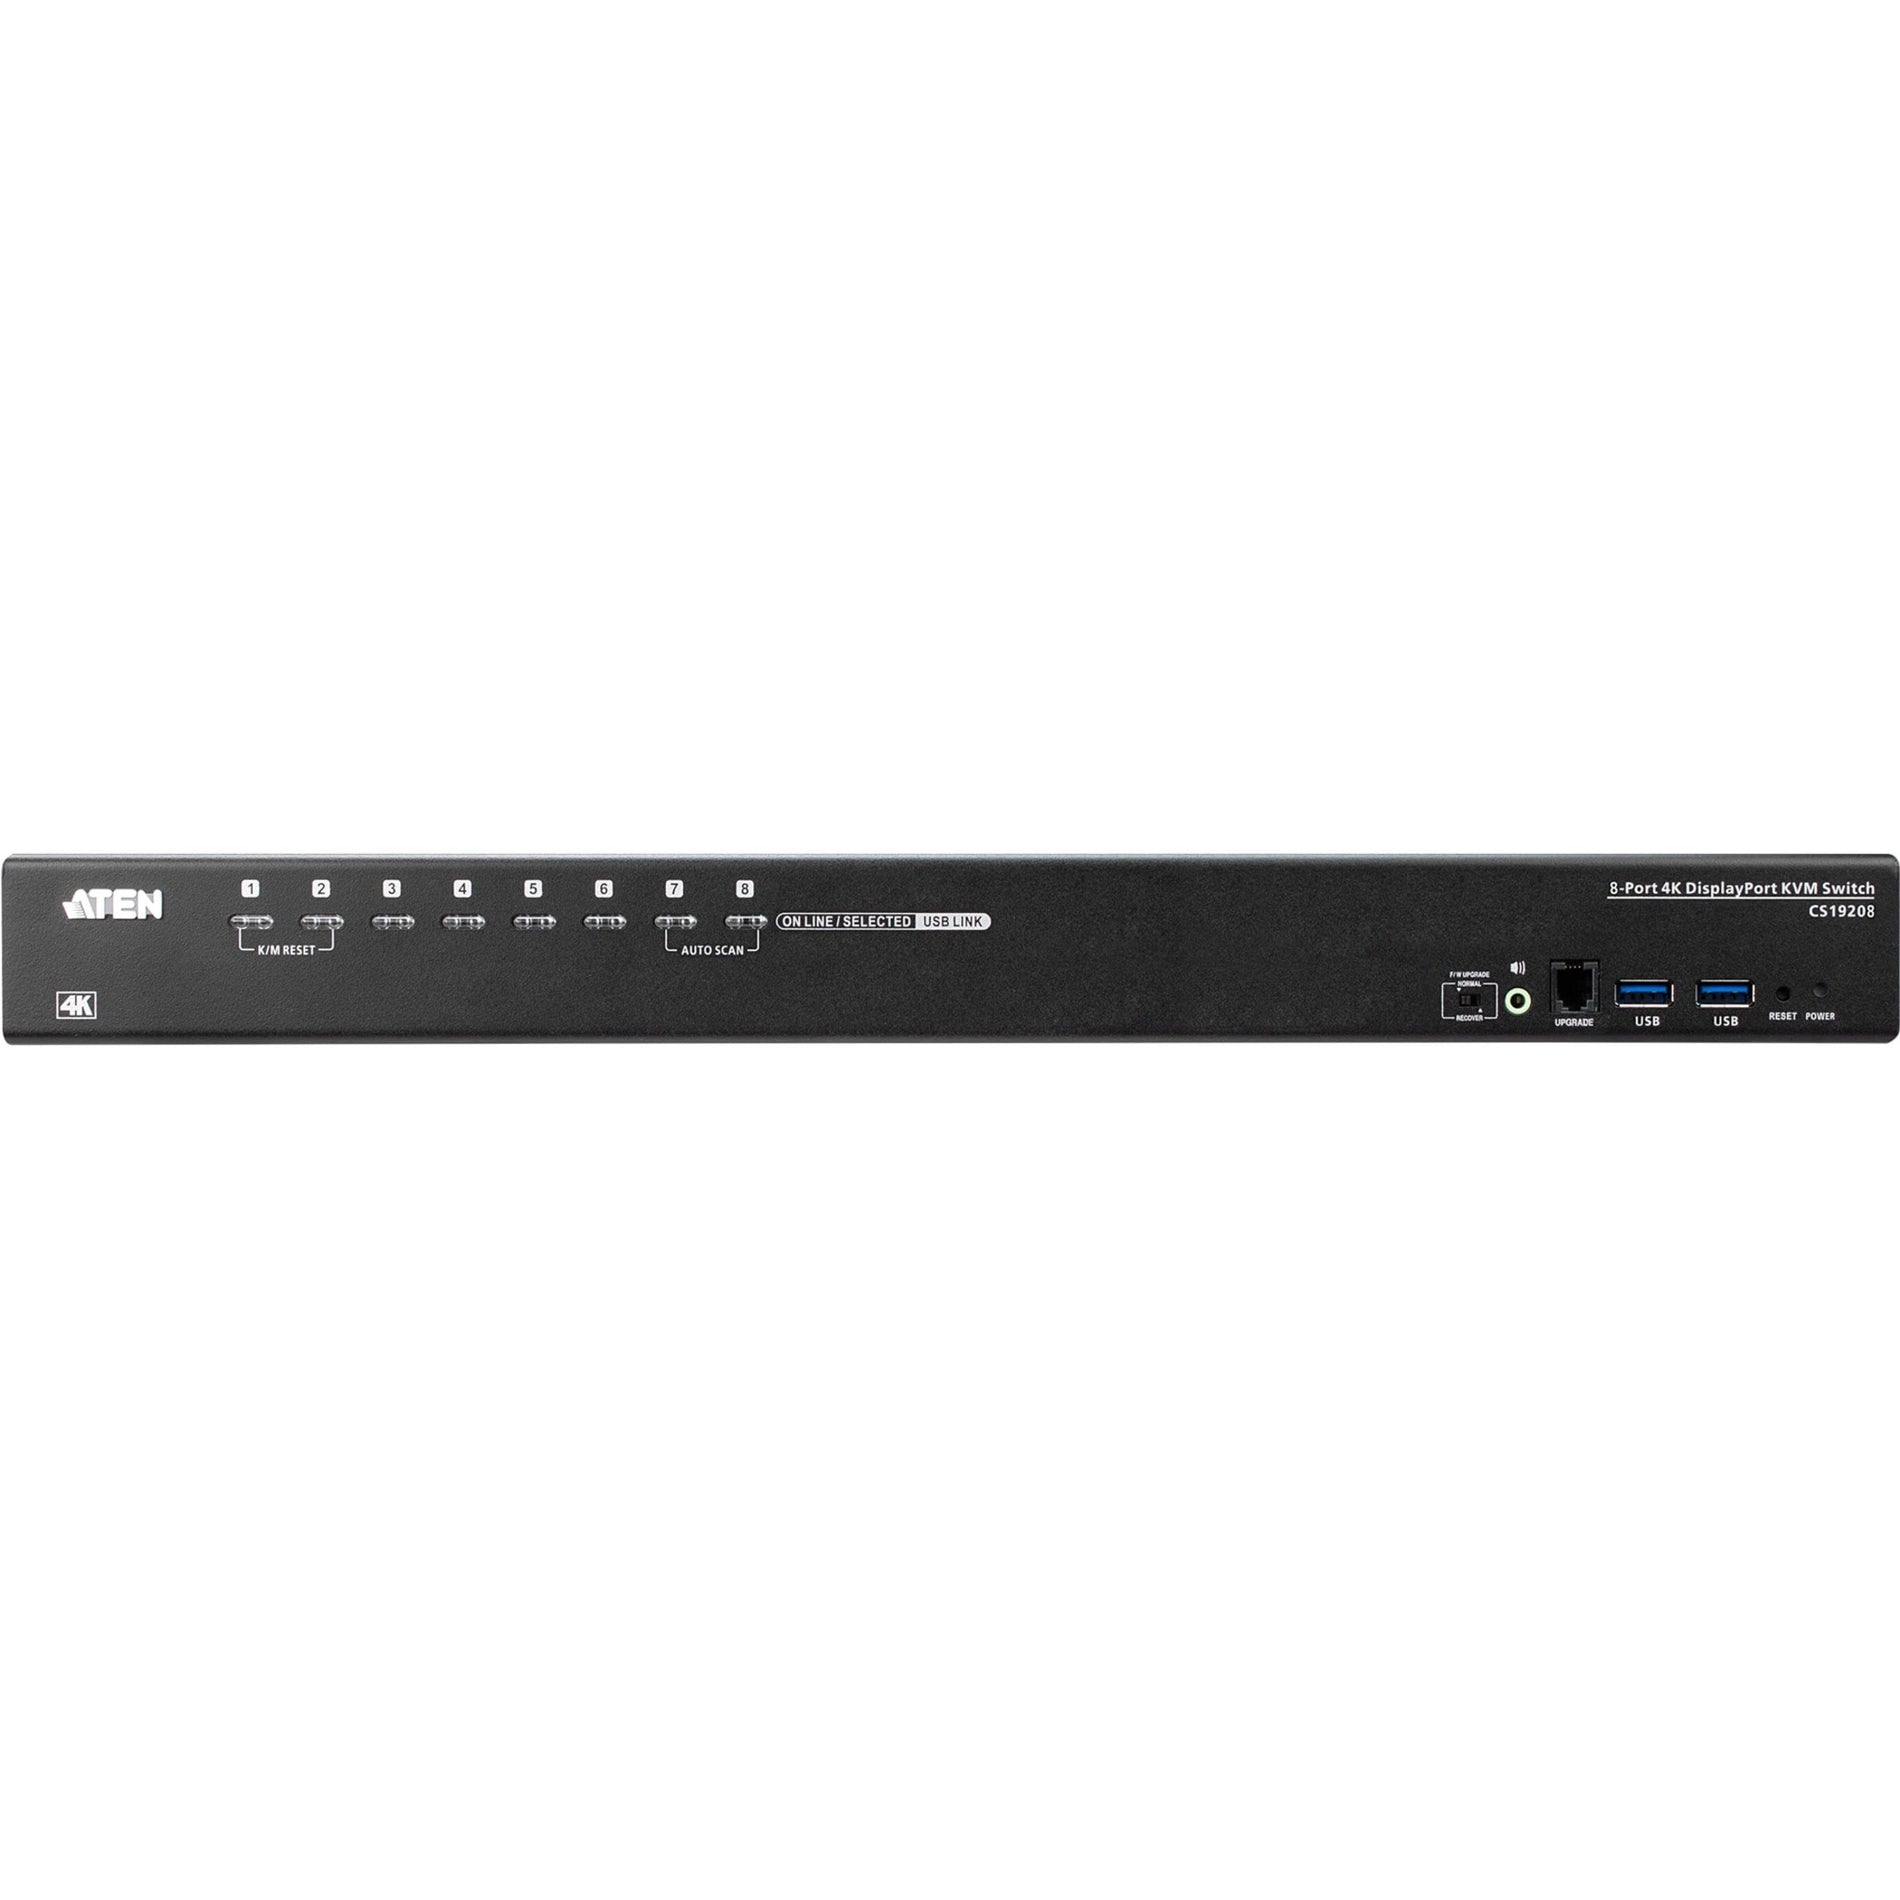 ATEN CS19208 8-Port USB 3.0 4K DisplayPort KVM Switch with Rack Mounting Kit, High-Performance Control for Multiple Computers